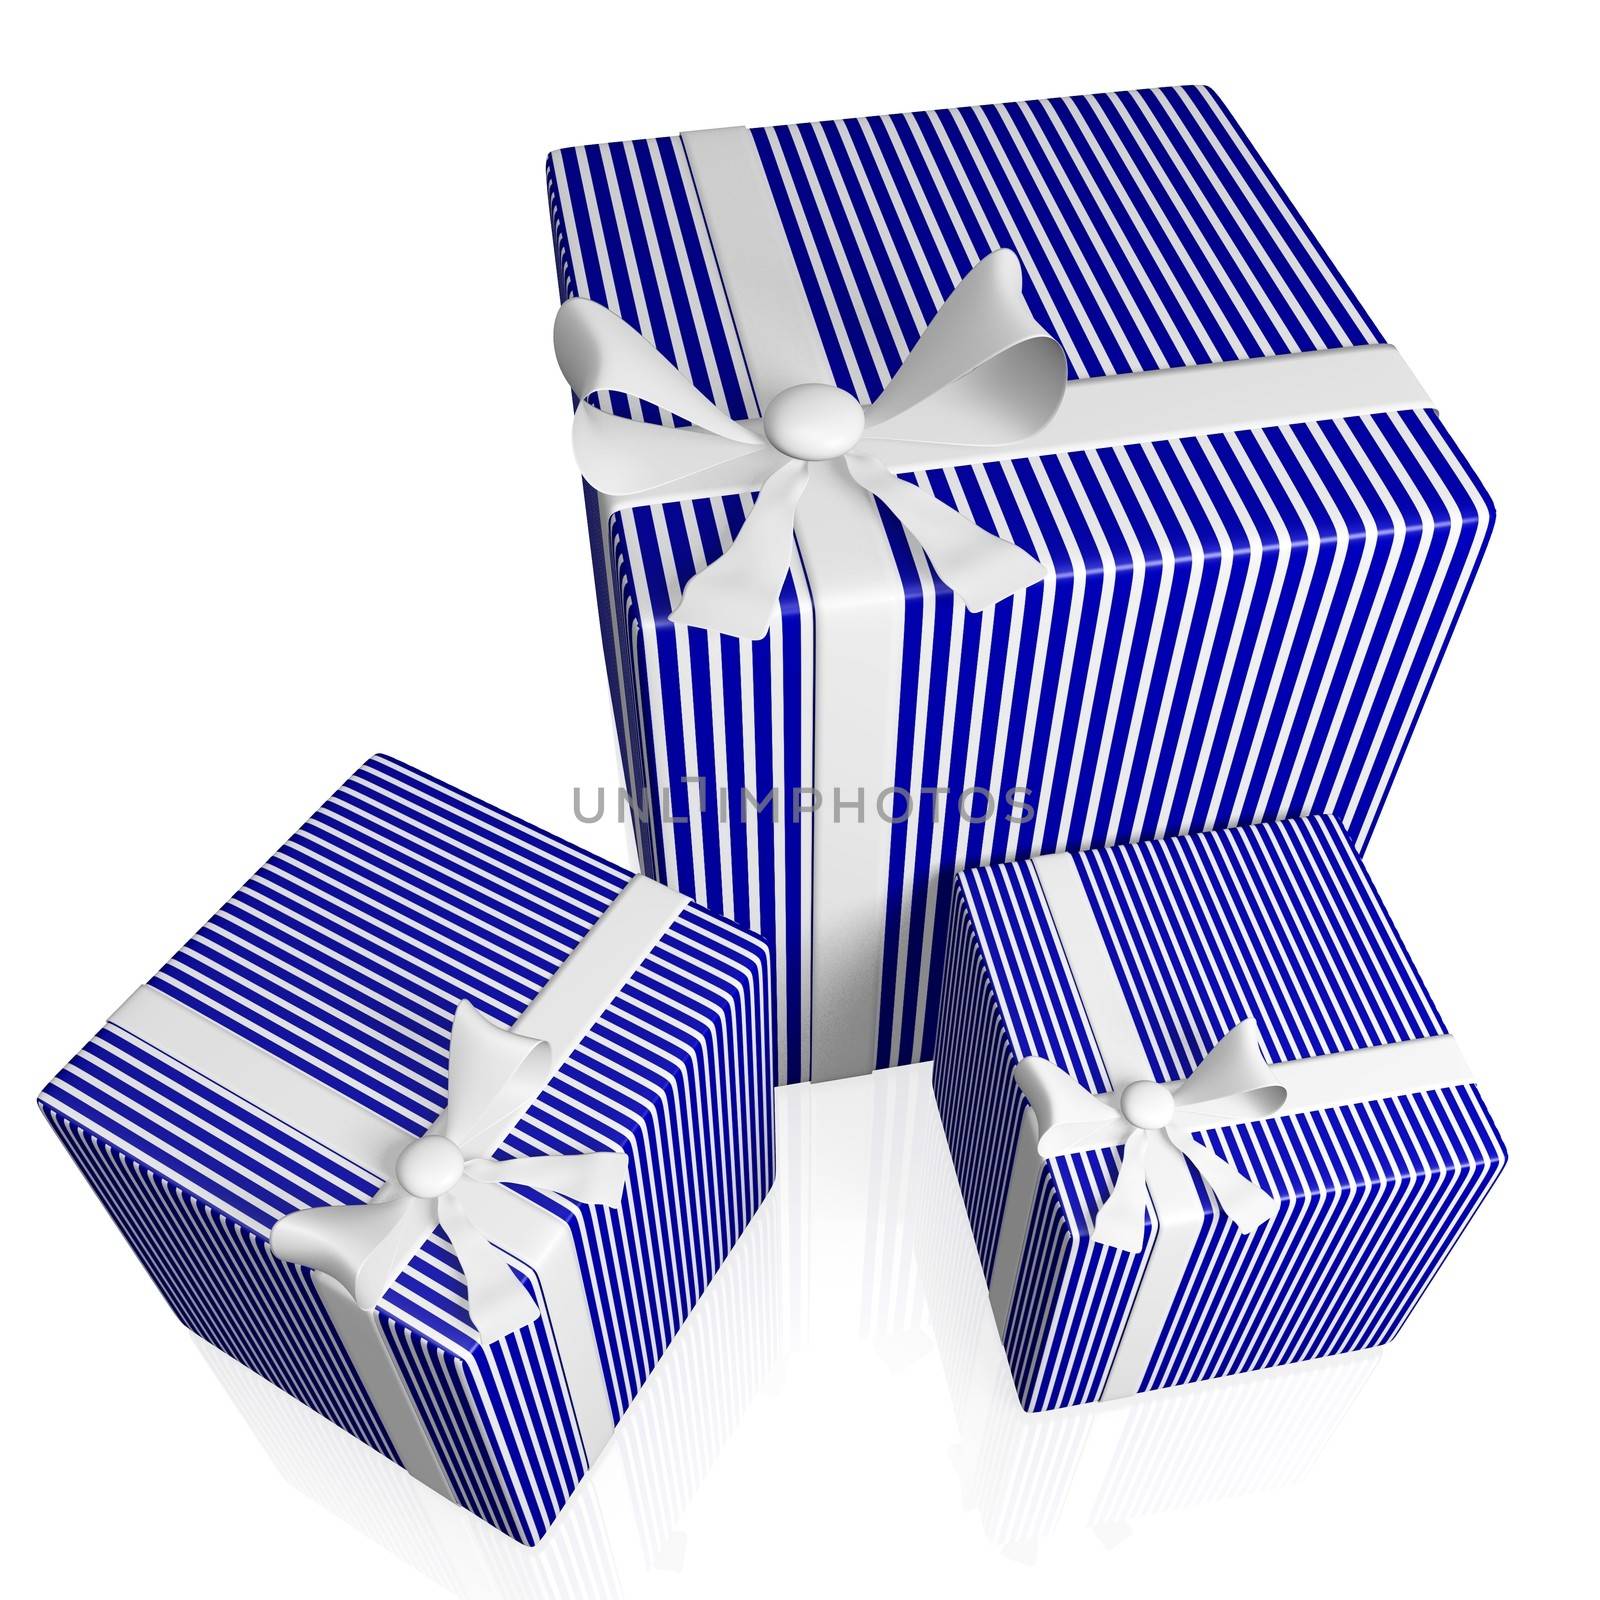 Blue Striped Gifts with White Bow Ribbons by RichieThakur